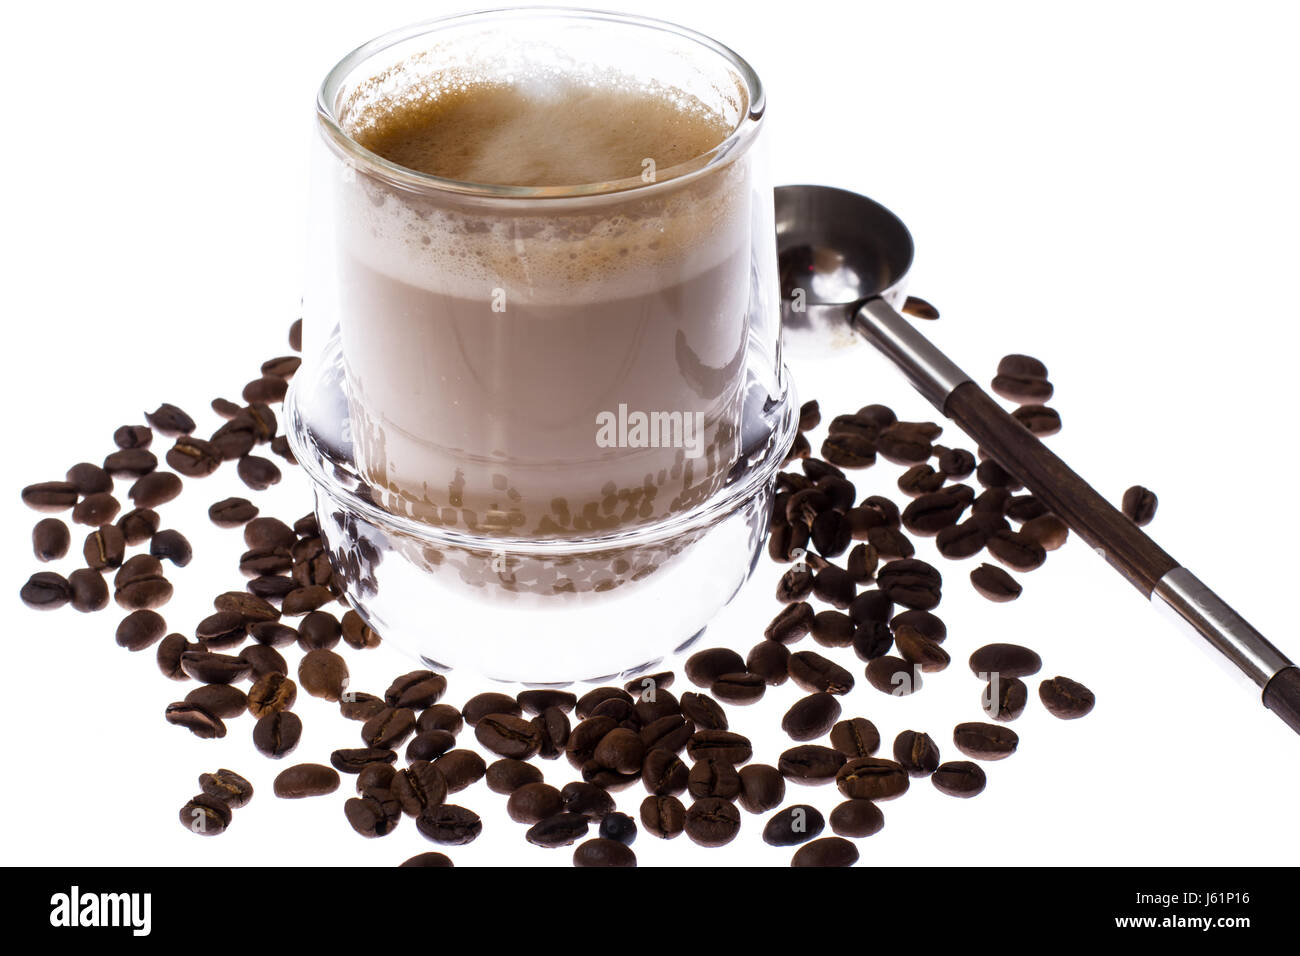 Coffee with milk in glass cup on white background. Studio Photo Stock Photo